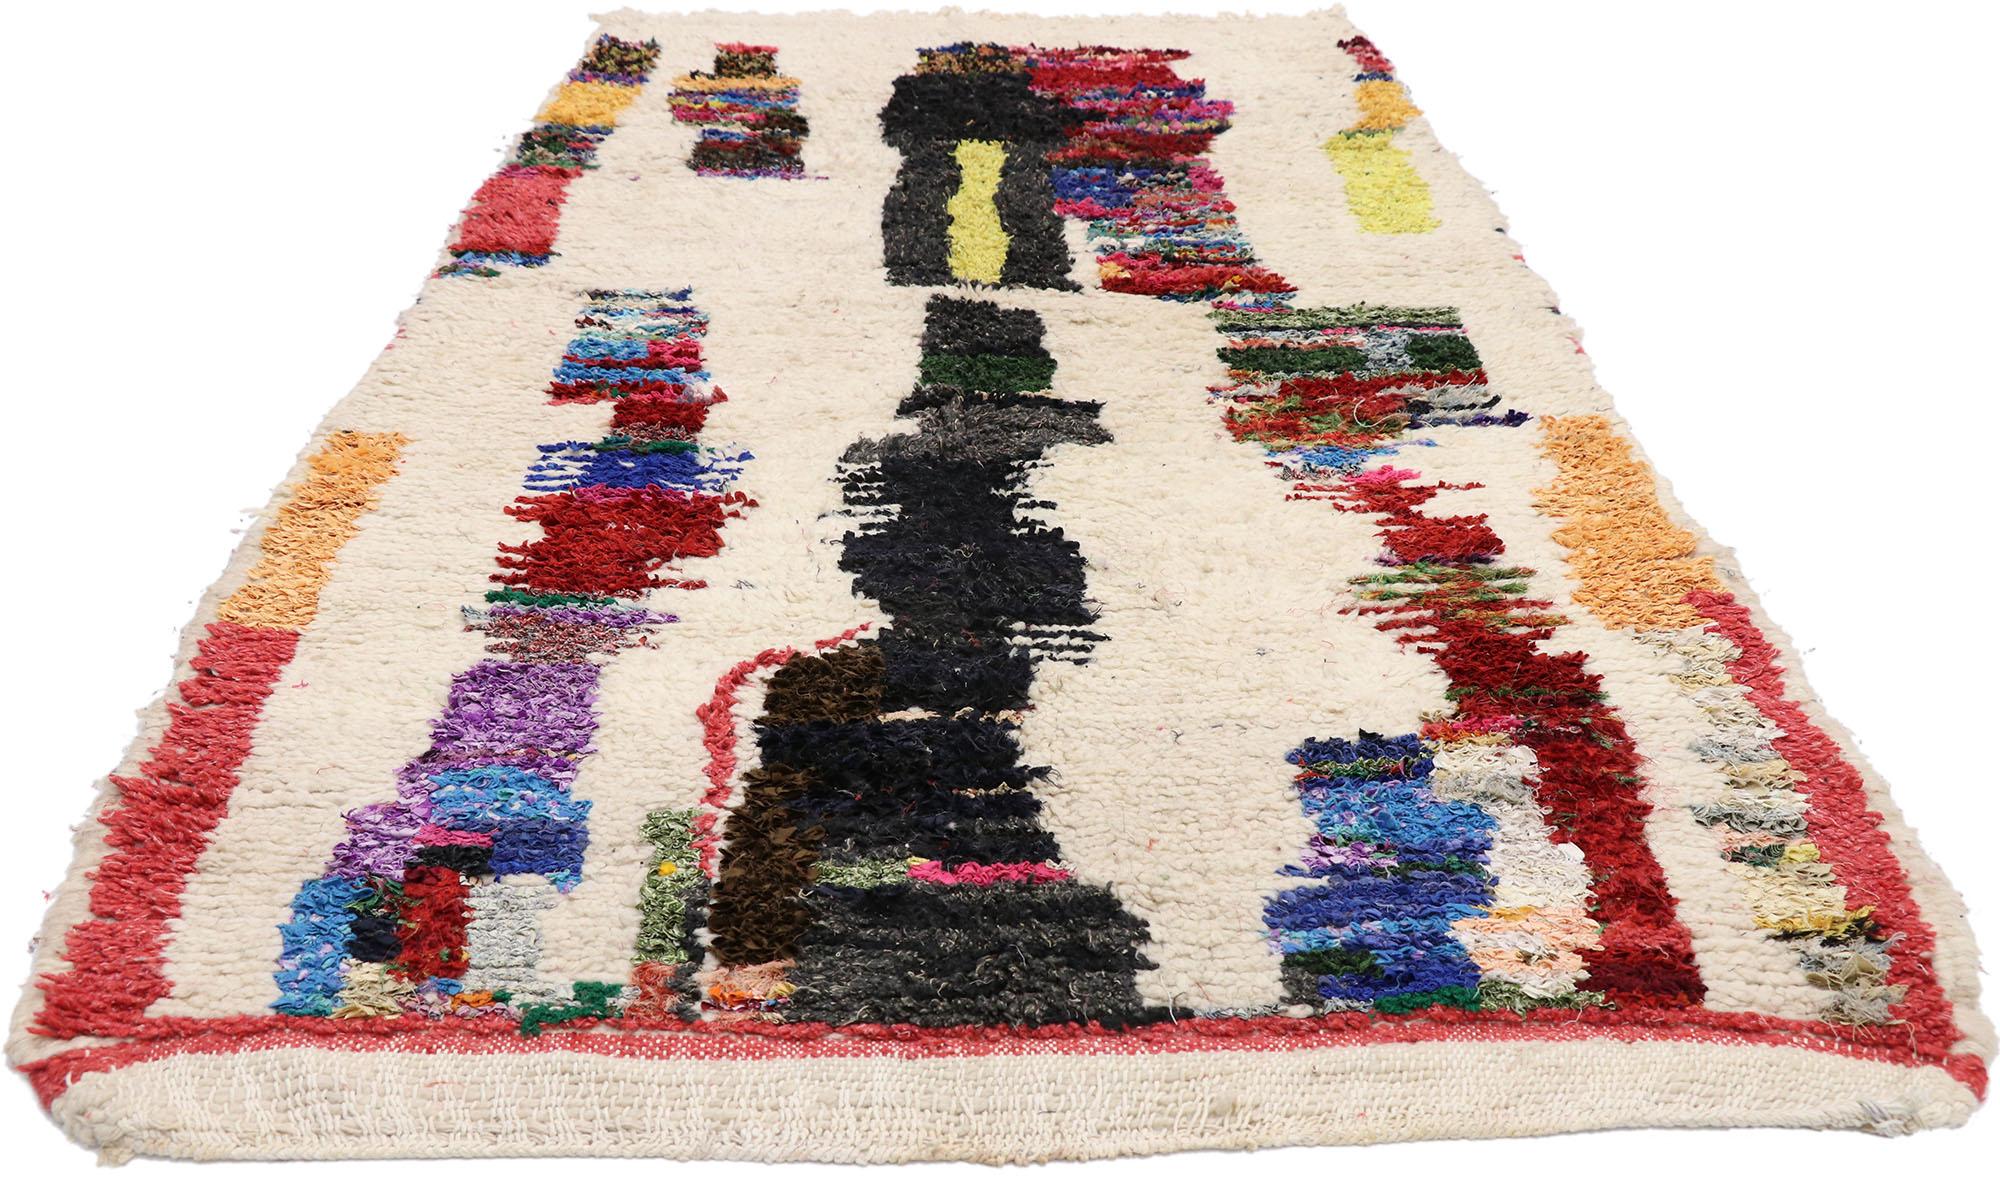 Expressionist Vintage Berber Boucherouite Moroccan Azilal Rug with Contemporary Abstract Style